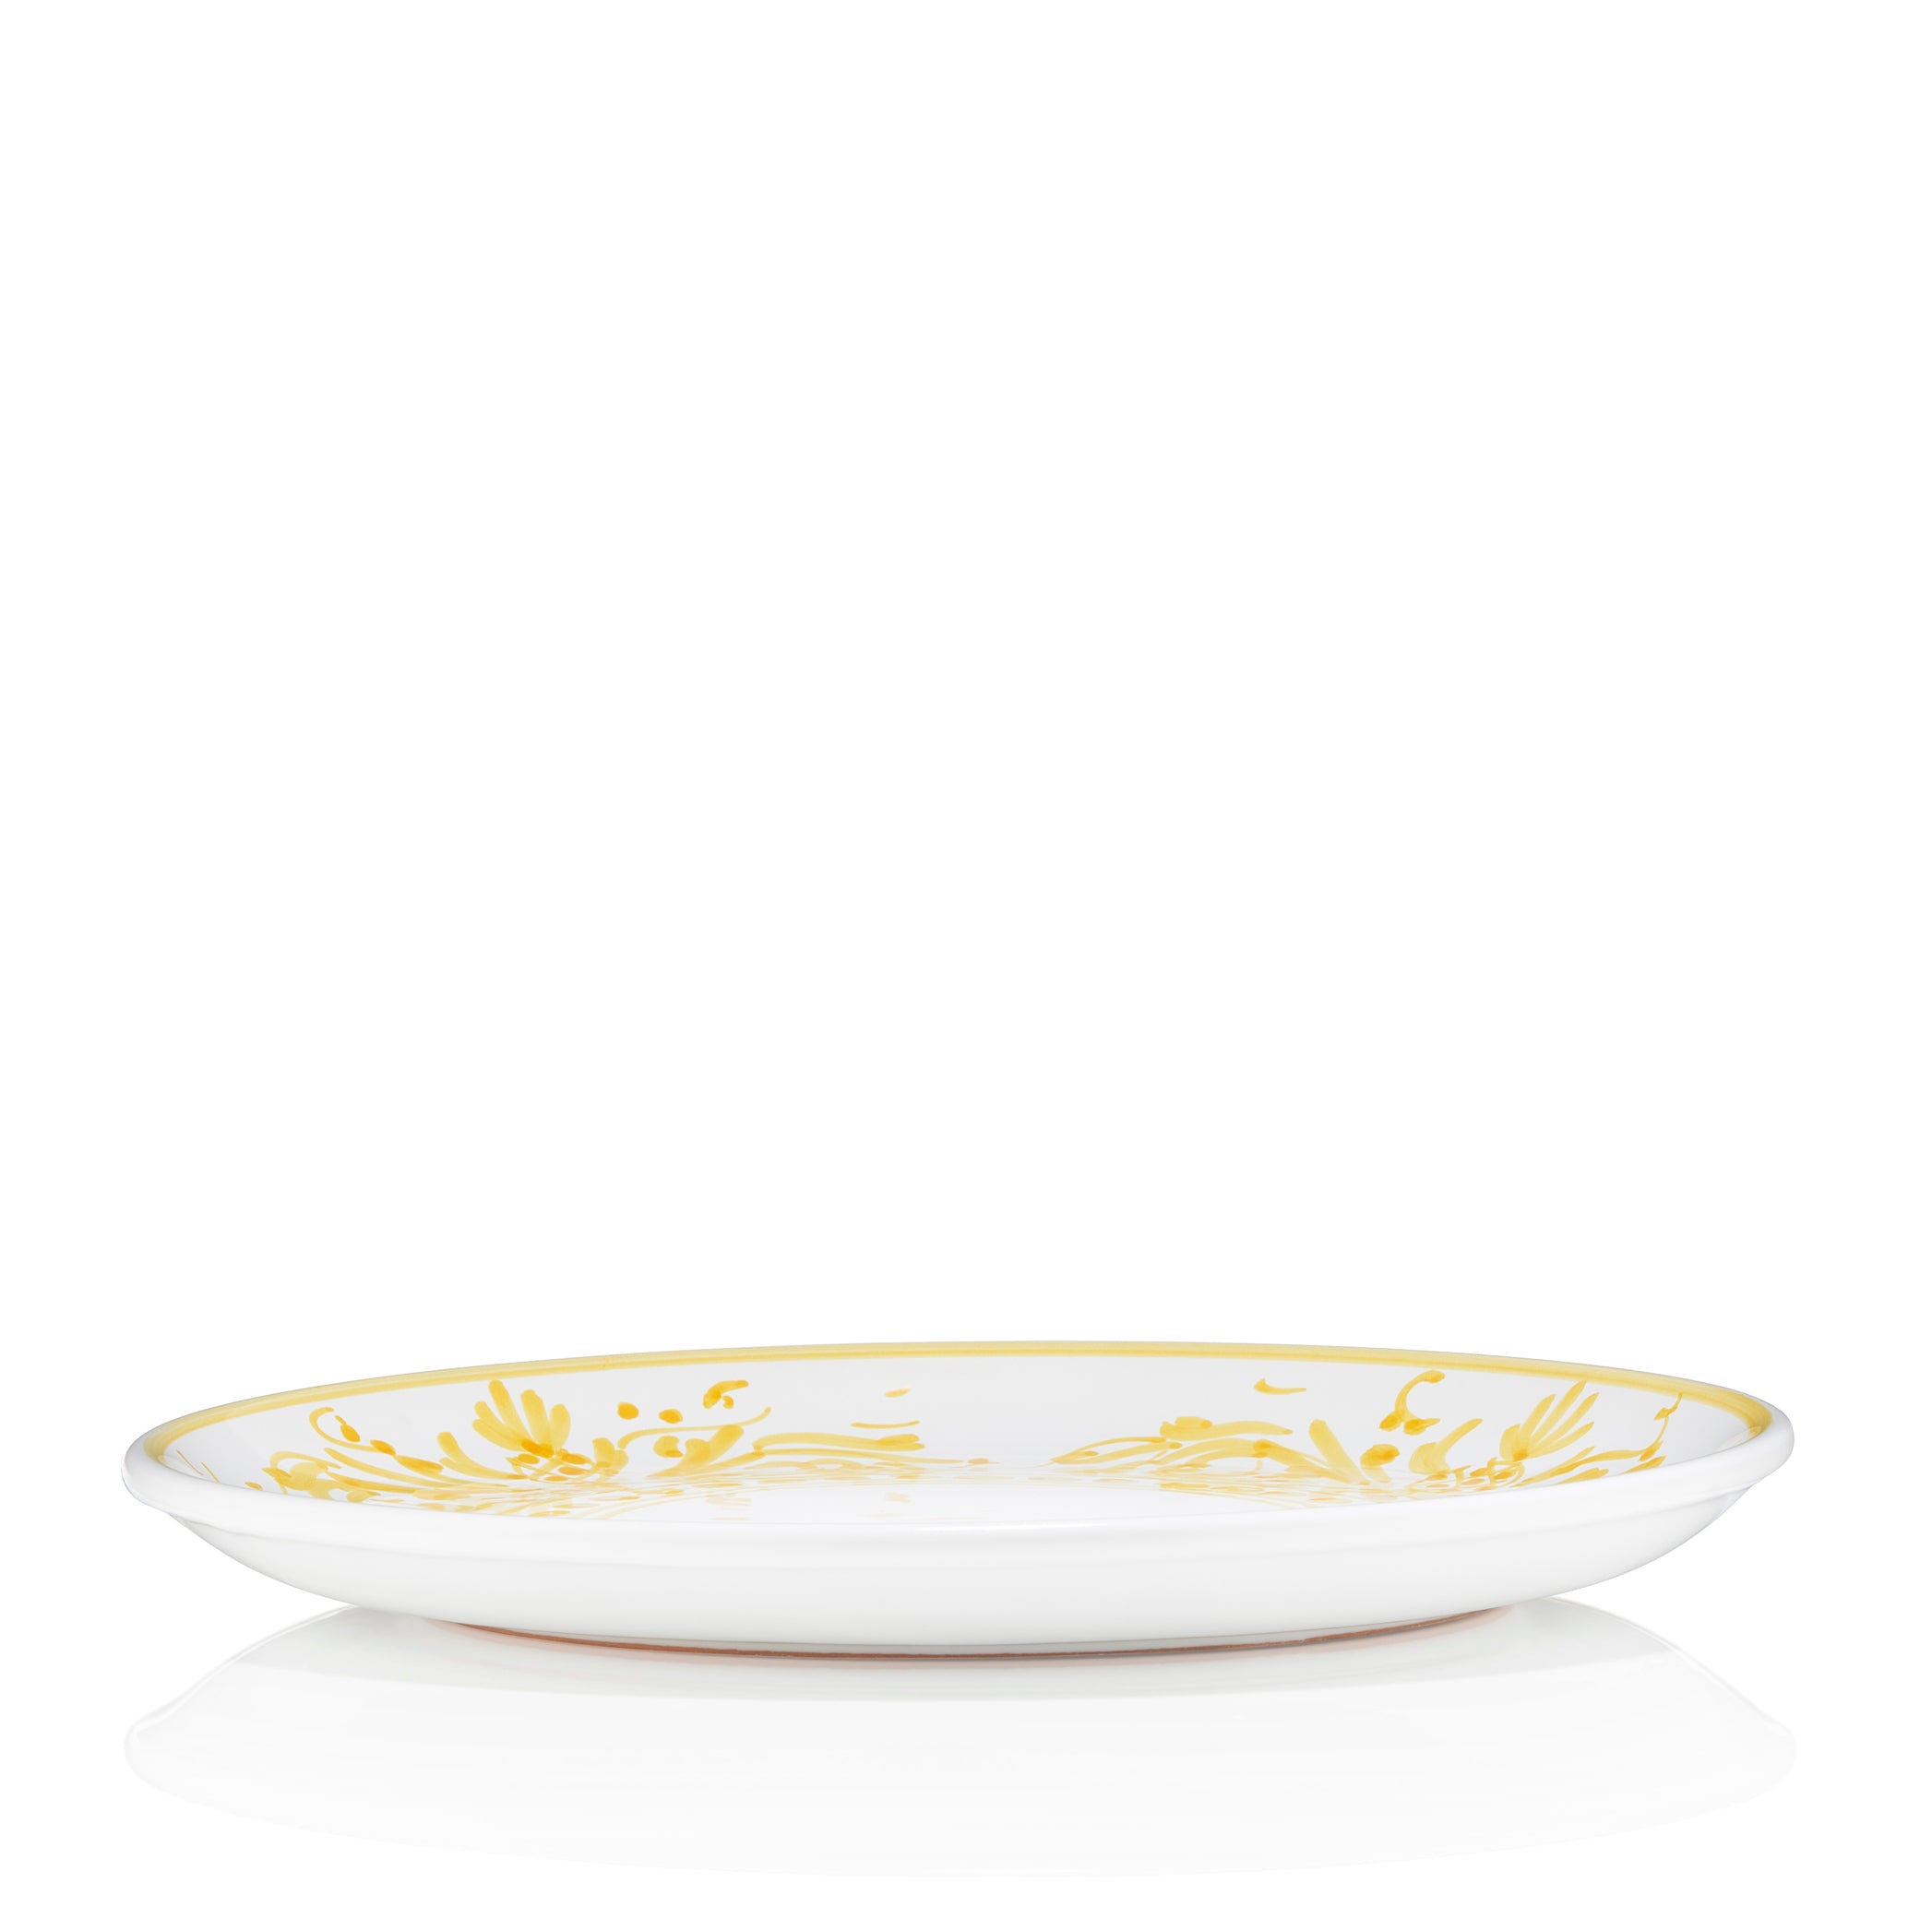 S&B Decorated Dinner Plate in White With Yellow Pattern, 26cm